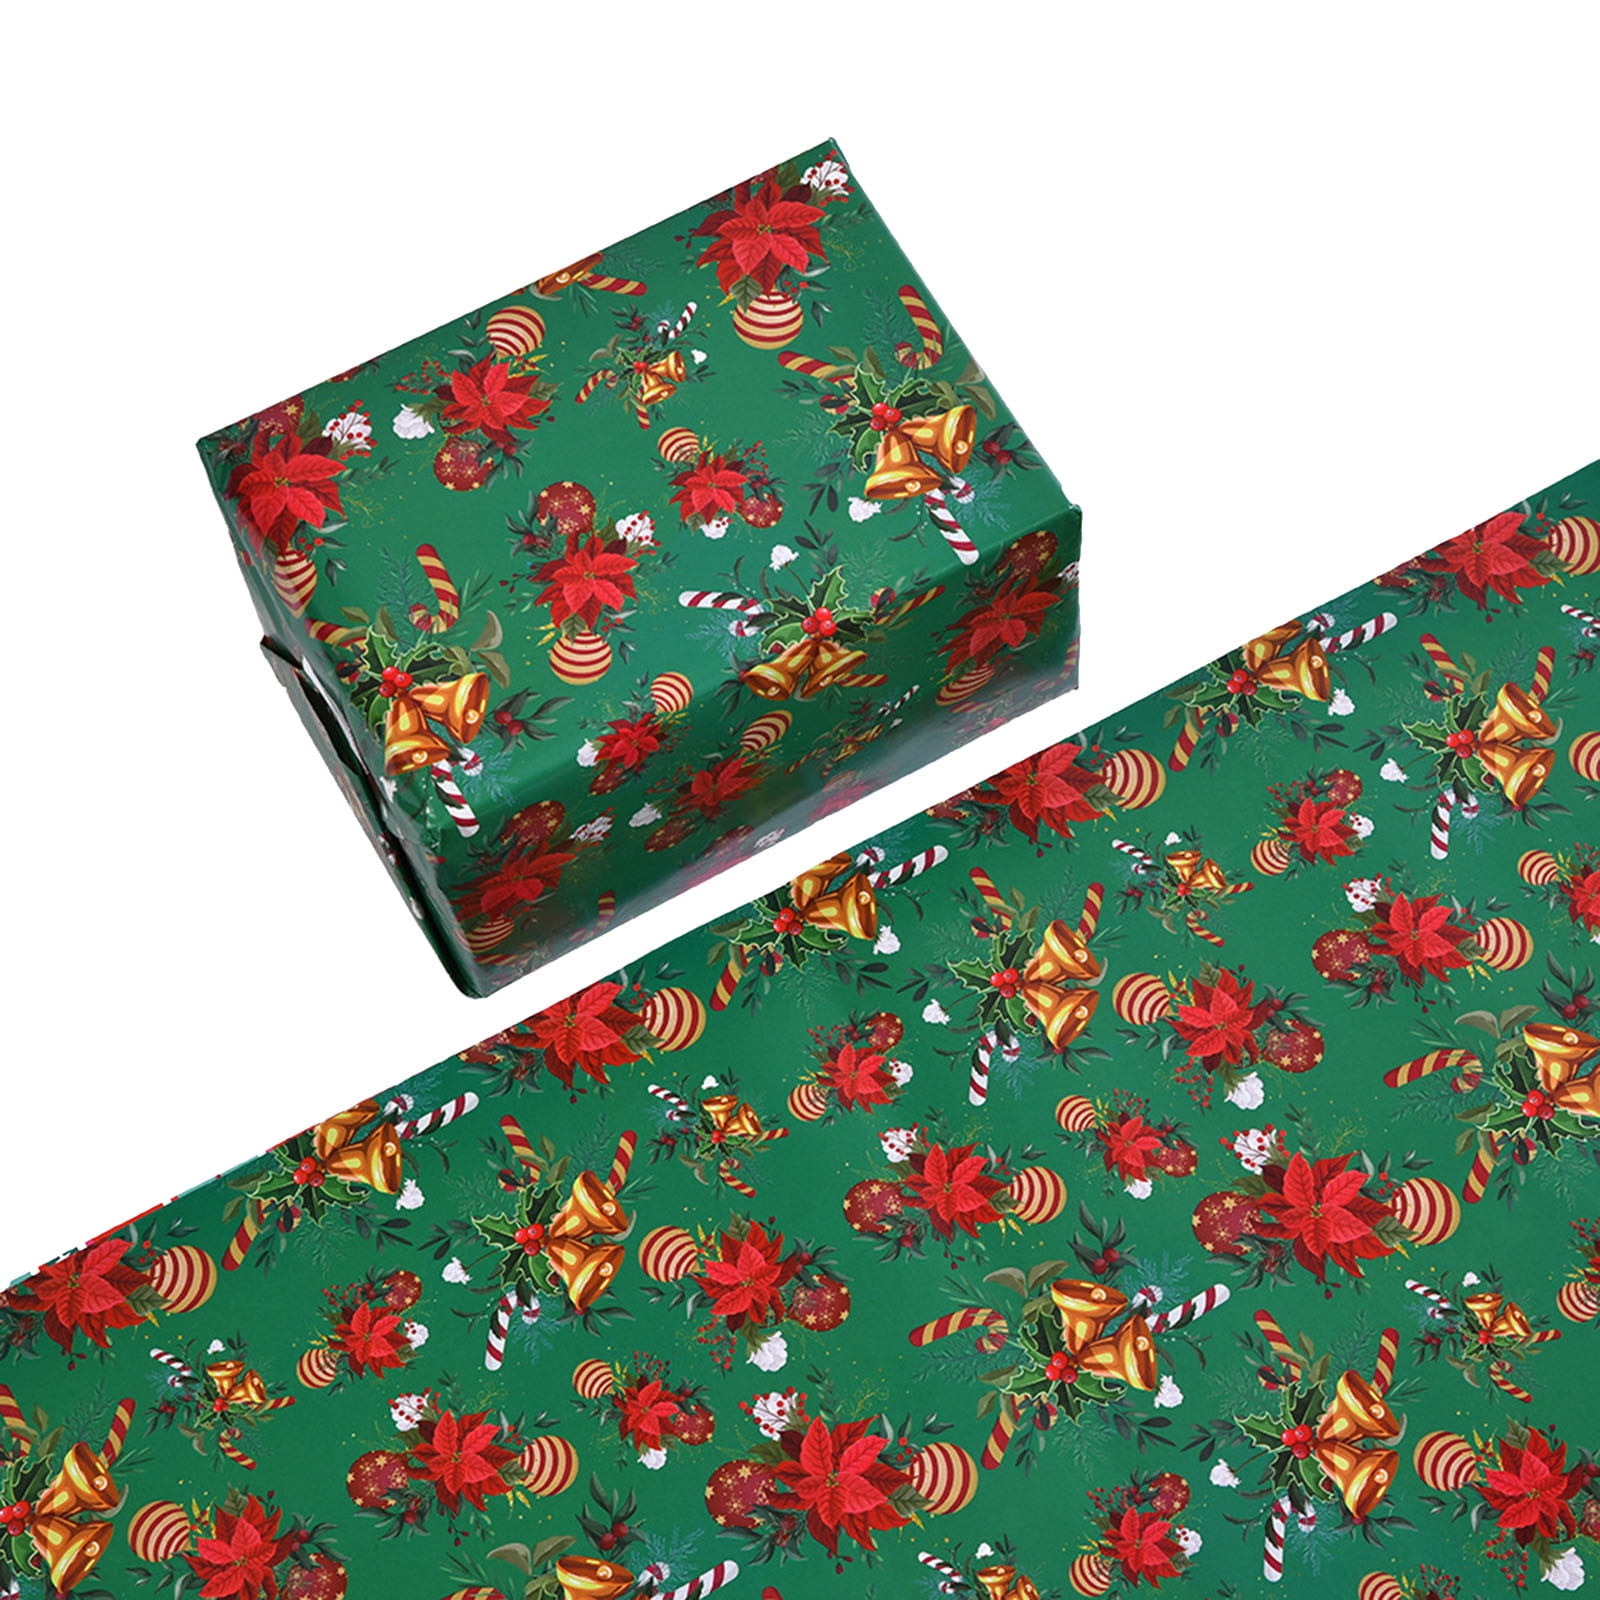 Saa Wrapping Paper (Set of 4) - Winter Garden